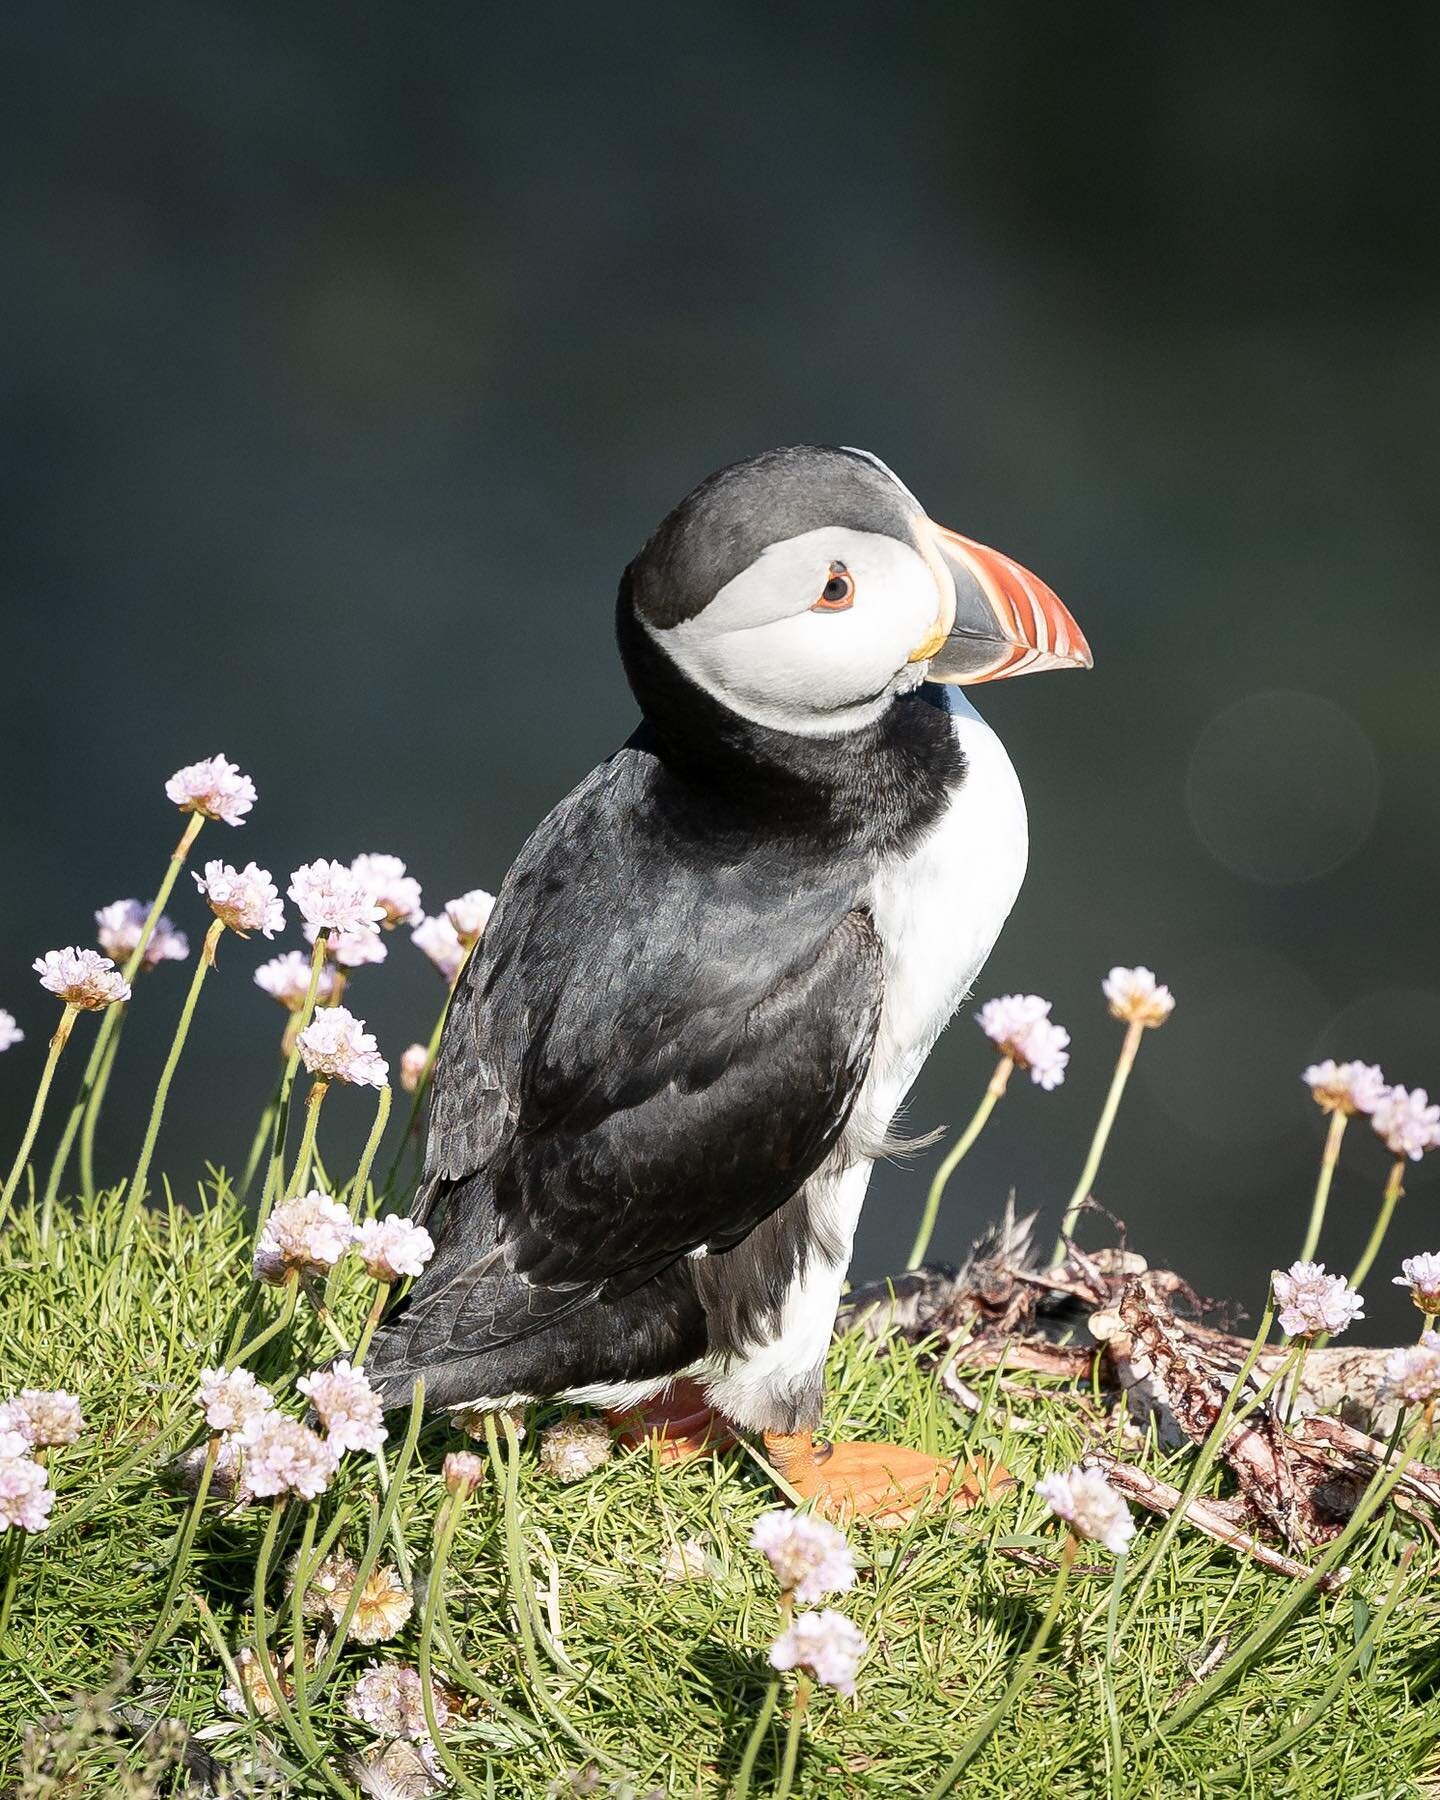 A puffin, possibly aware of the nearby skeleton ☠️